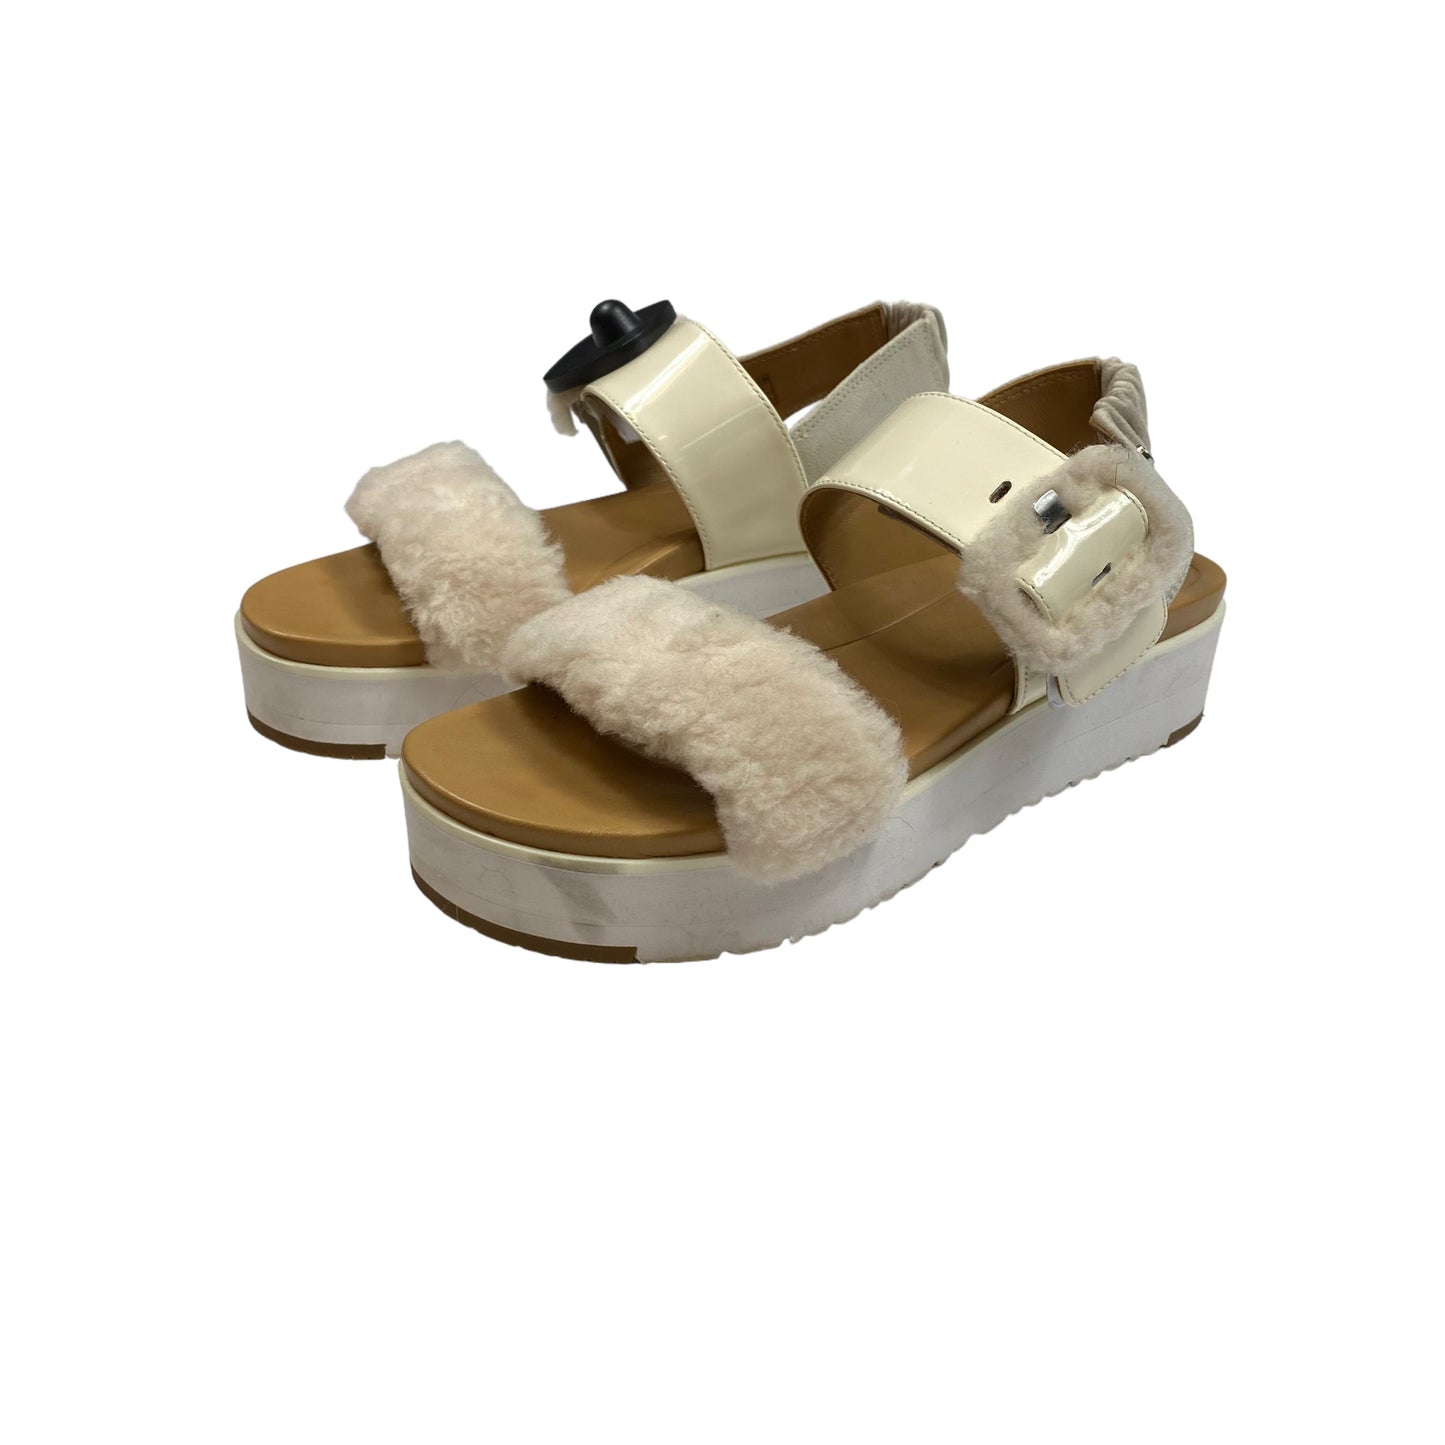 Sandals Heels Wedge By Ugg  Size: 9